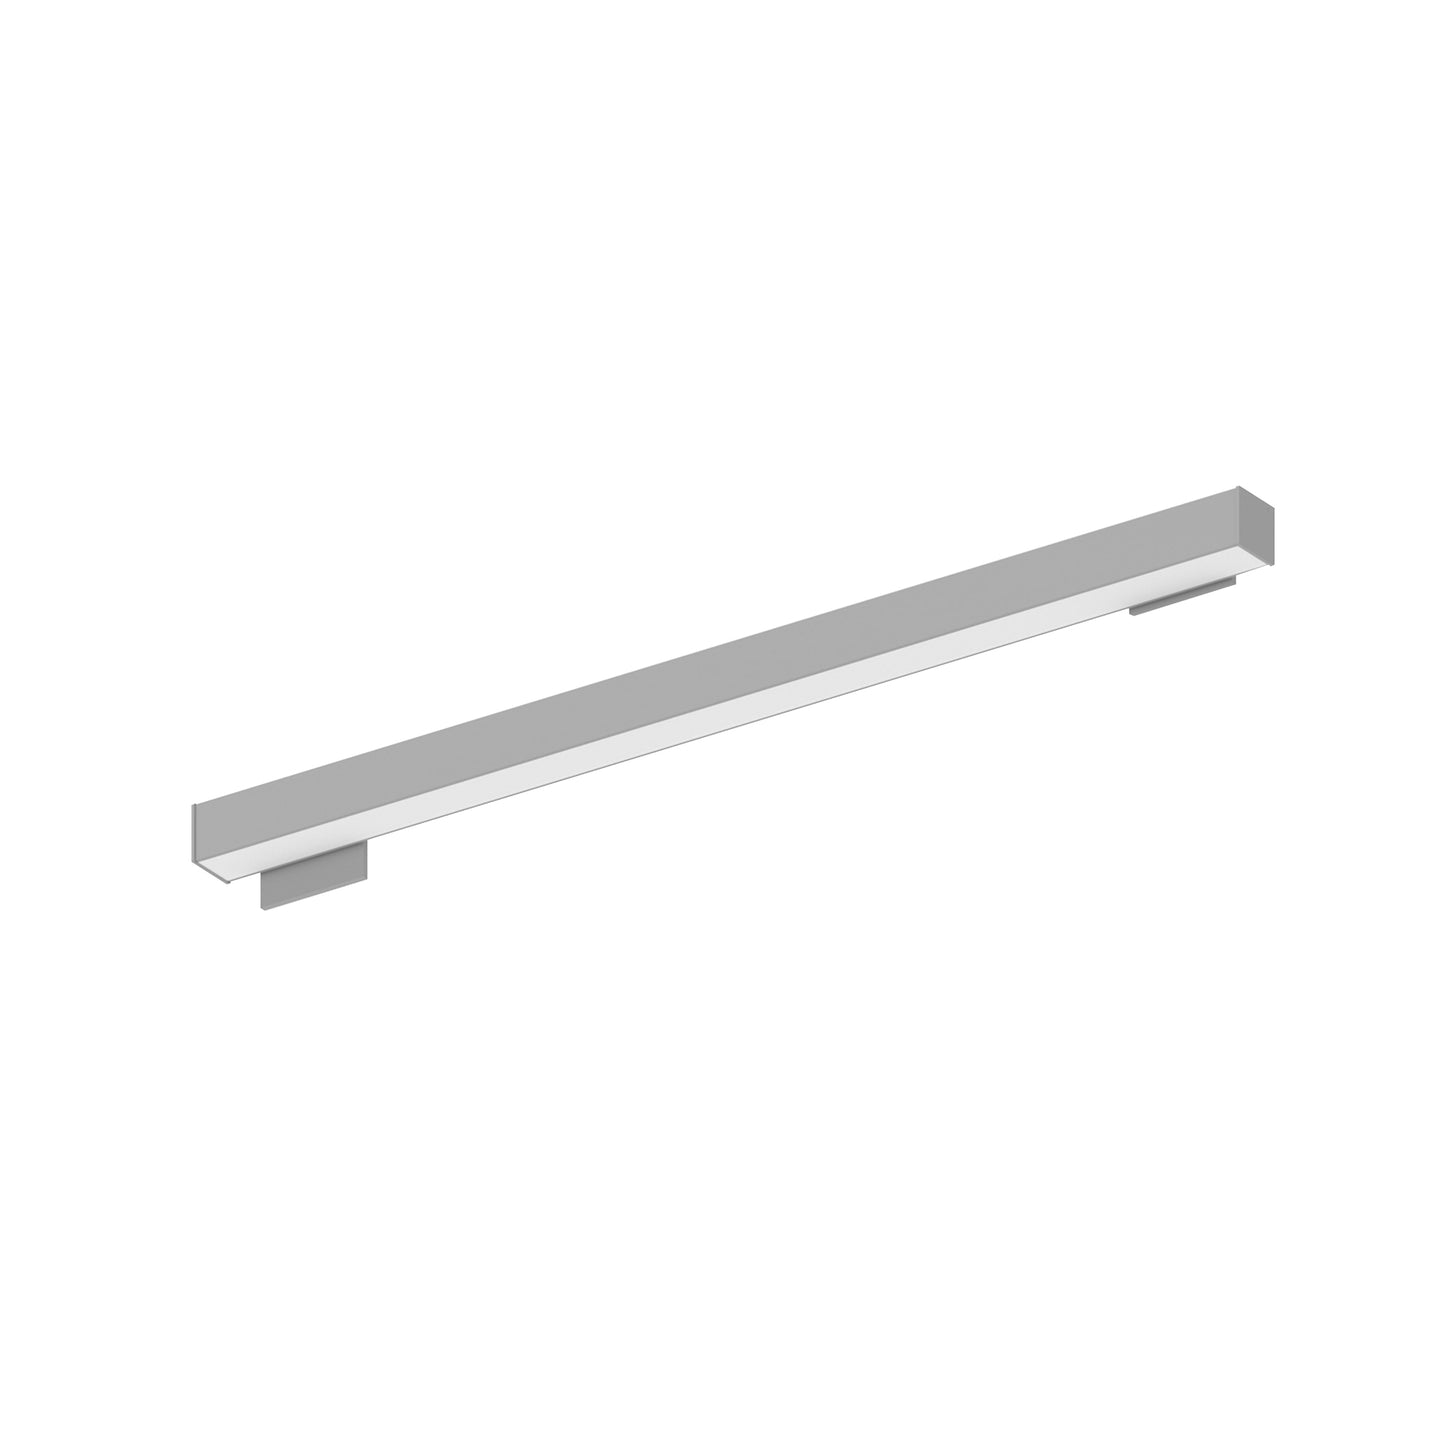 Nora Lighting 4' L-Line LED Wall Mount Linear, 4200lm / 3000K, 4"x4" Left Plate & 2"x4" Right Plate, Right Power Feed, Aluminum Finish   NWLIN-41030A/L4-R2P